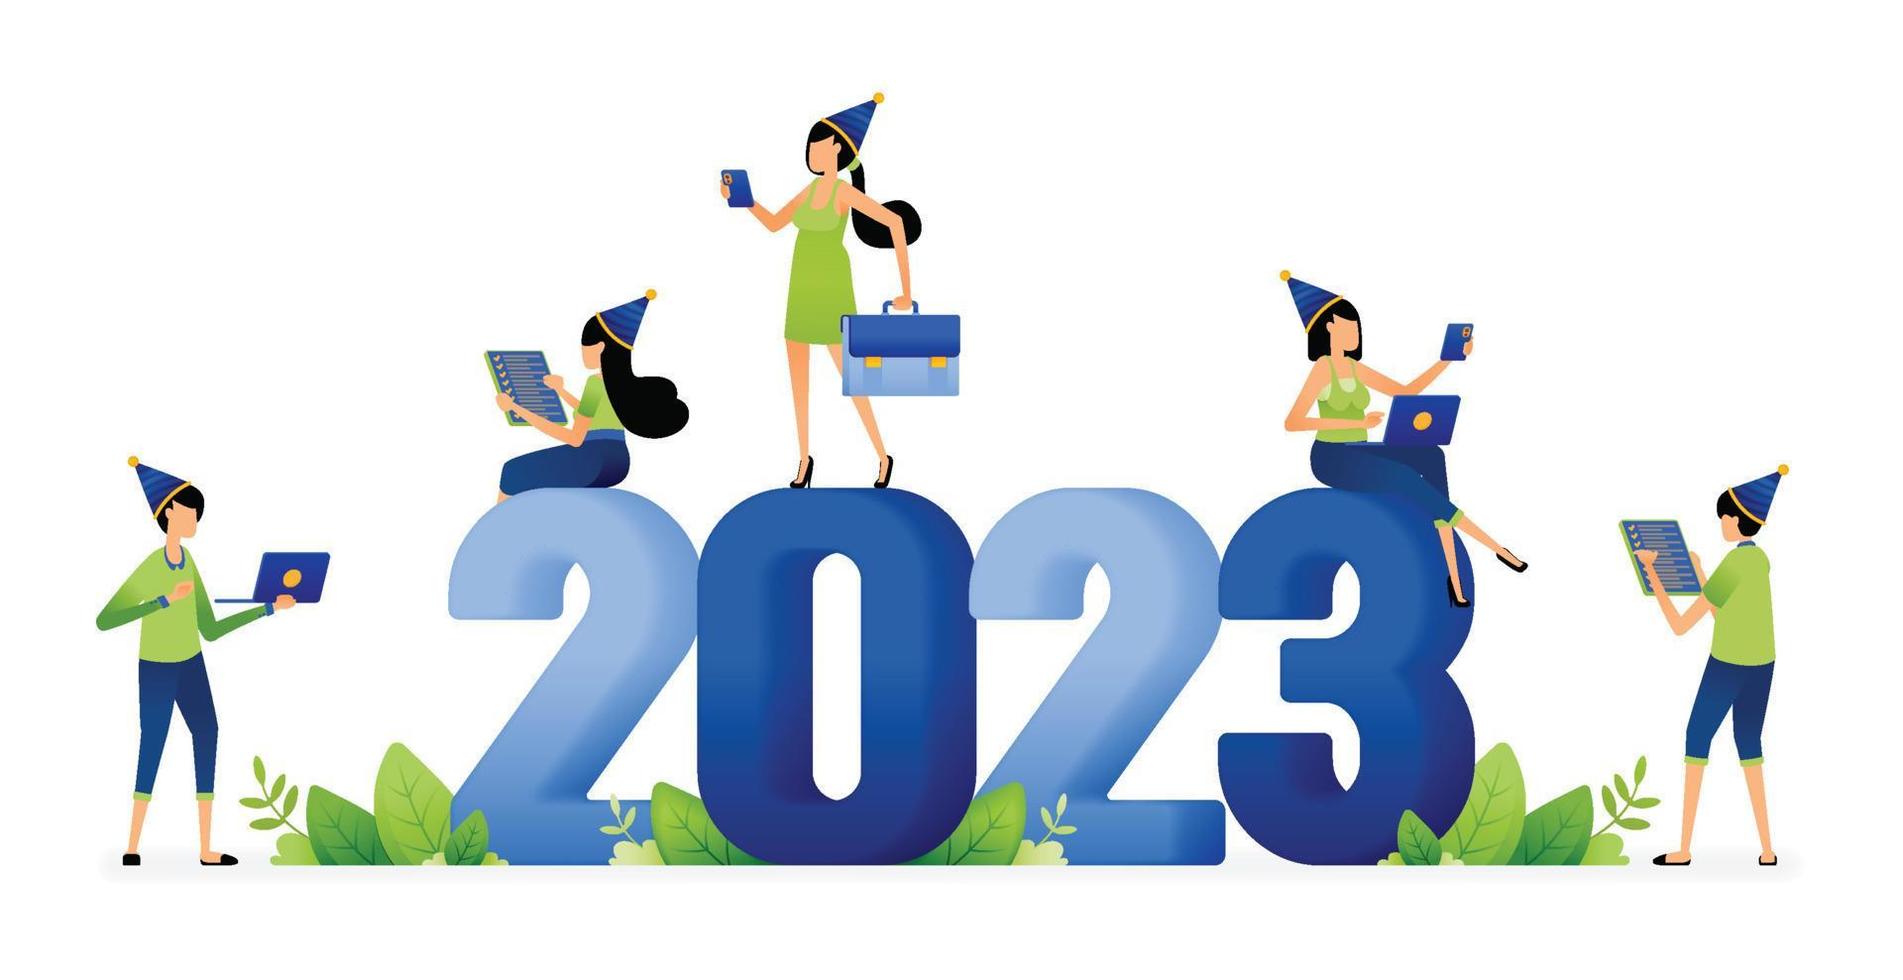 Illustration of employees and entrepreneurs welcoming new opportunities and goals at turn of year 2022 to 2023. Designed for website, landing page, flyer, banner, apps, brochure, startup media company vector